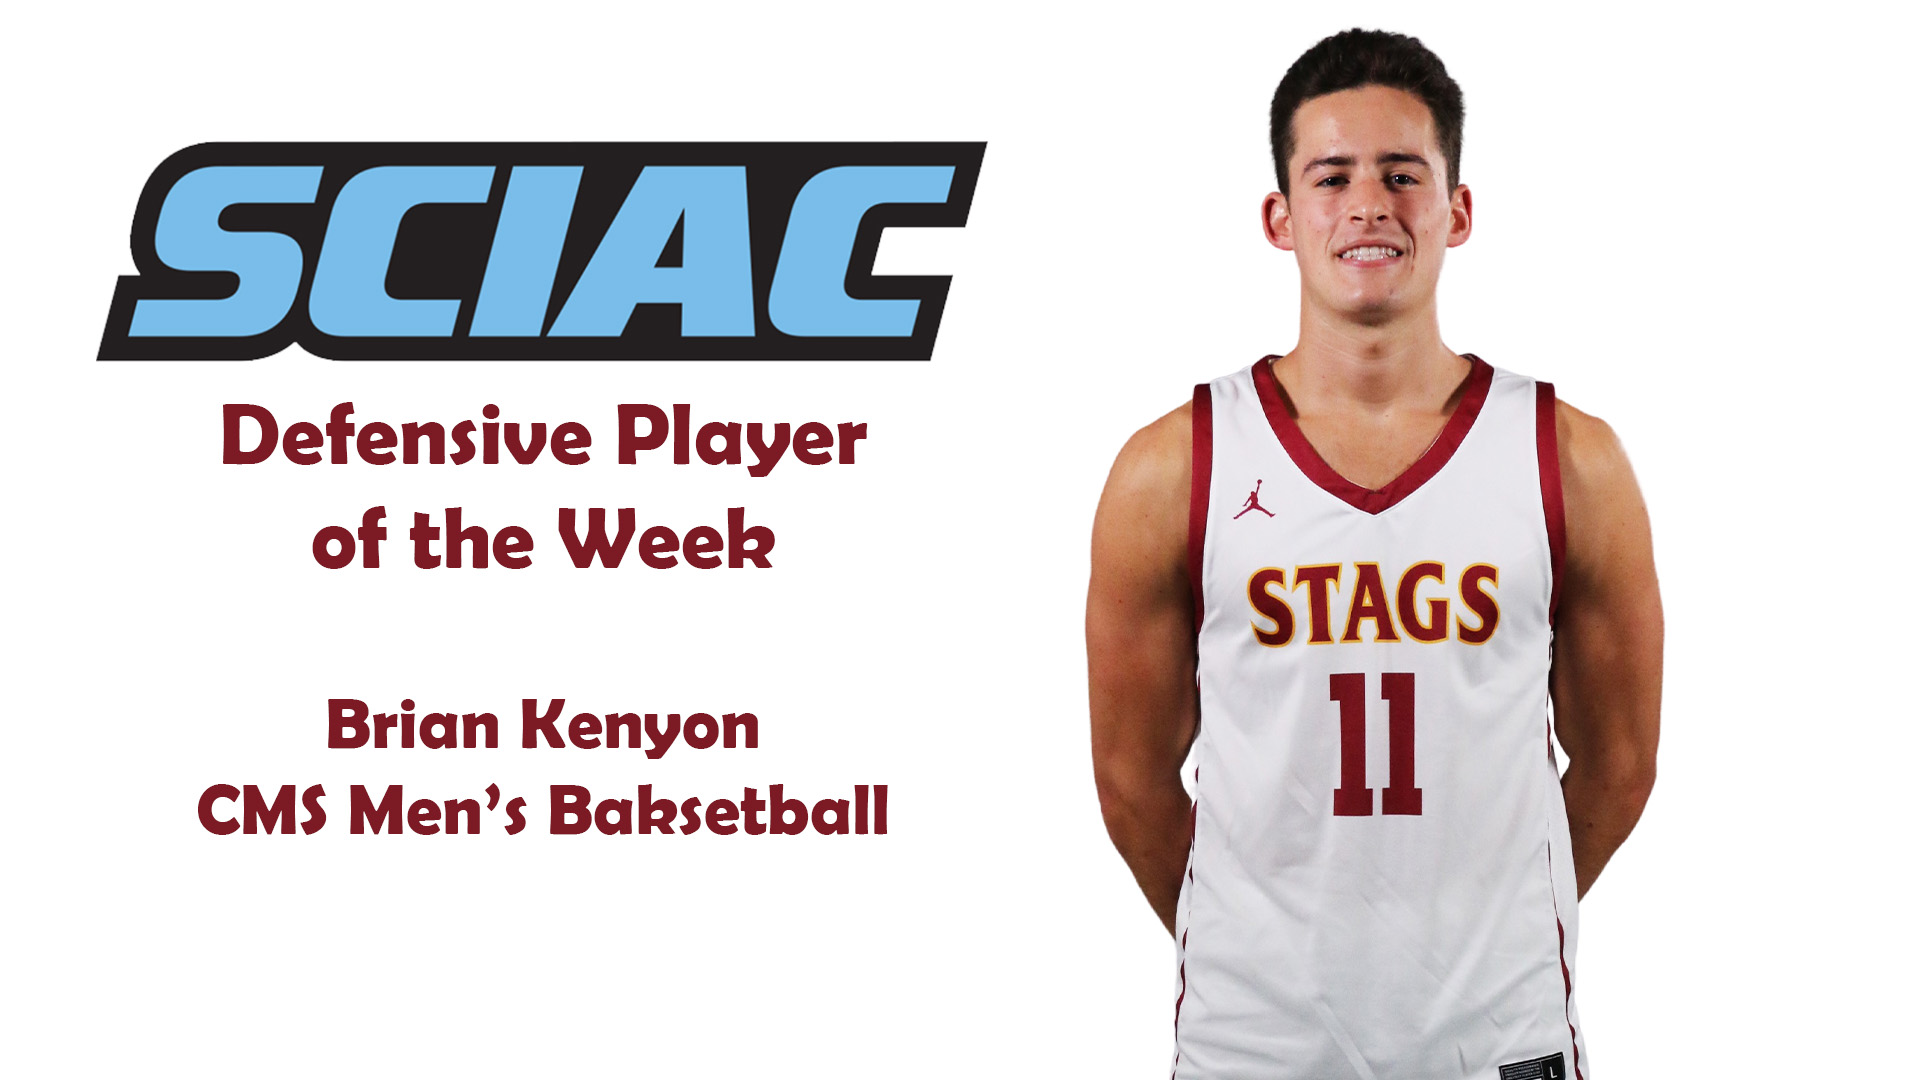 Posed shot of Brian Kenyon with the SCIAC logo